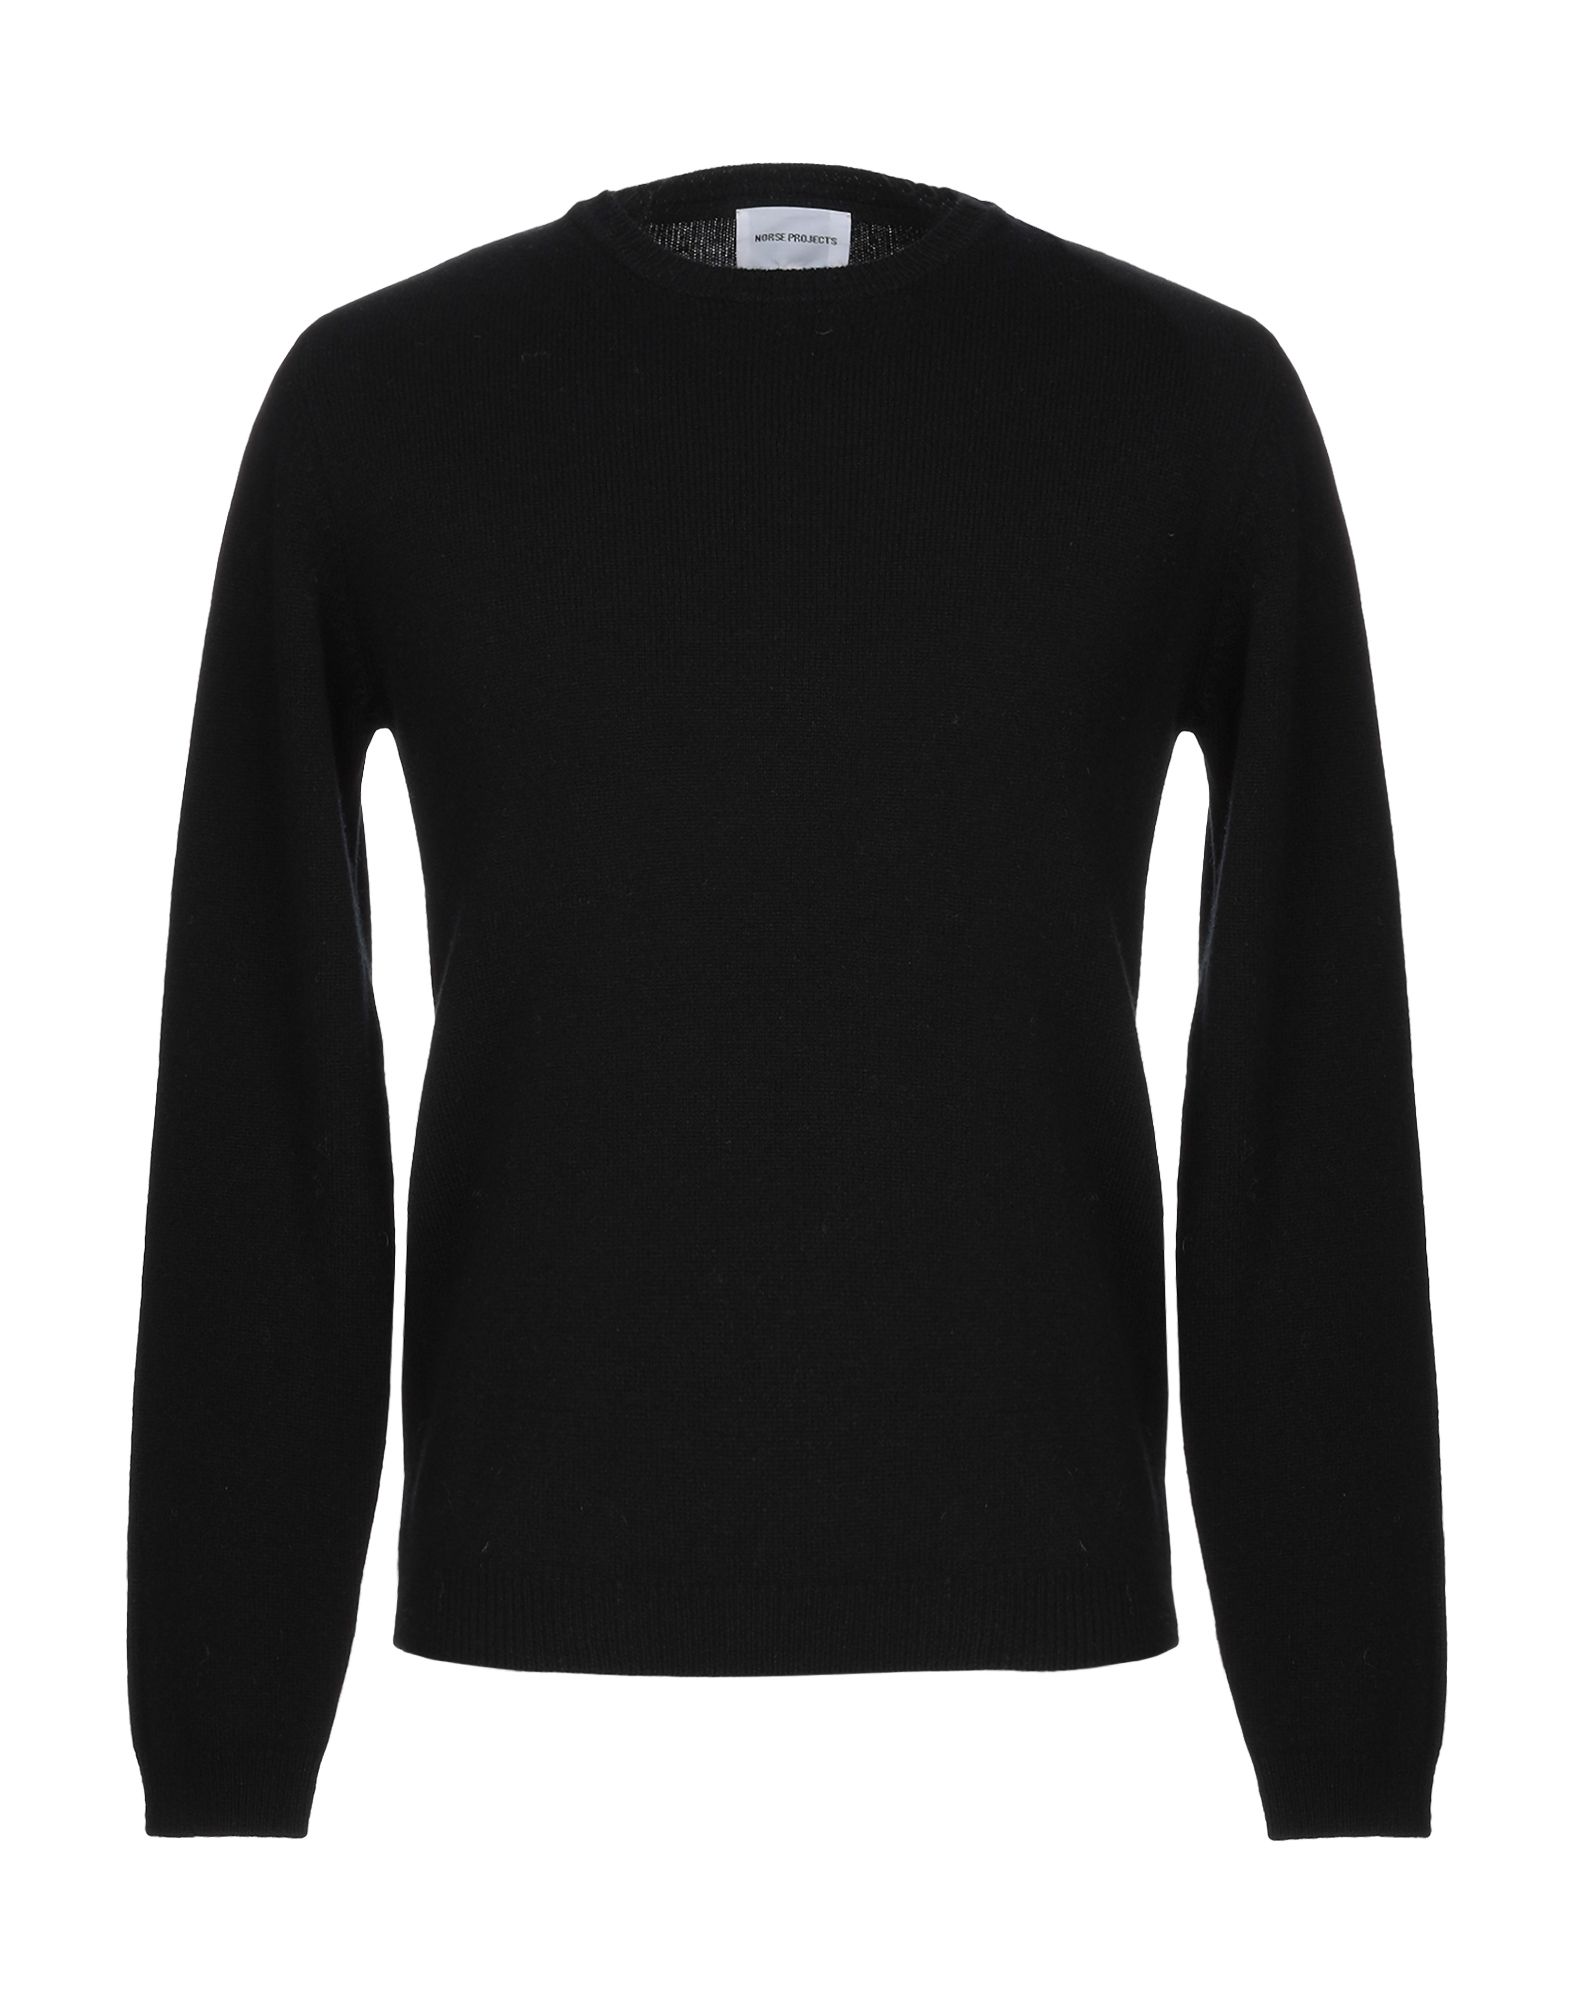 NORSE PROJECTS NORSE PROJECTS MAN SWEATER BLACK SIZE XXL LAMBSWOOL,39867840DK 6